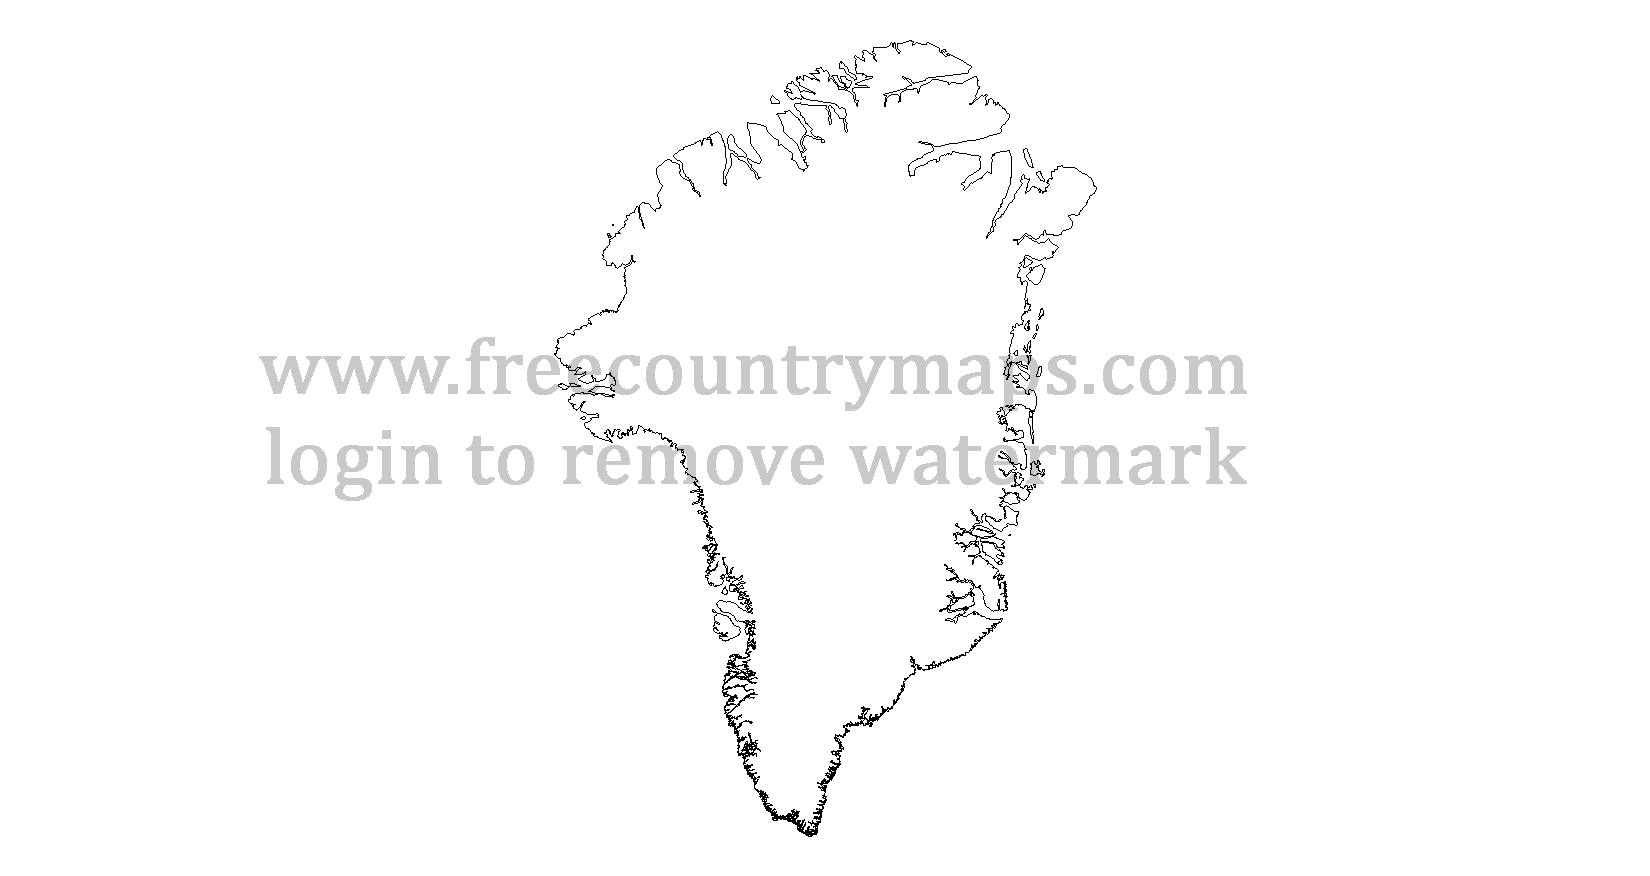 Greenland Outline Map : Mercator